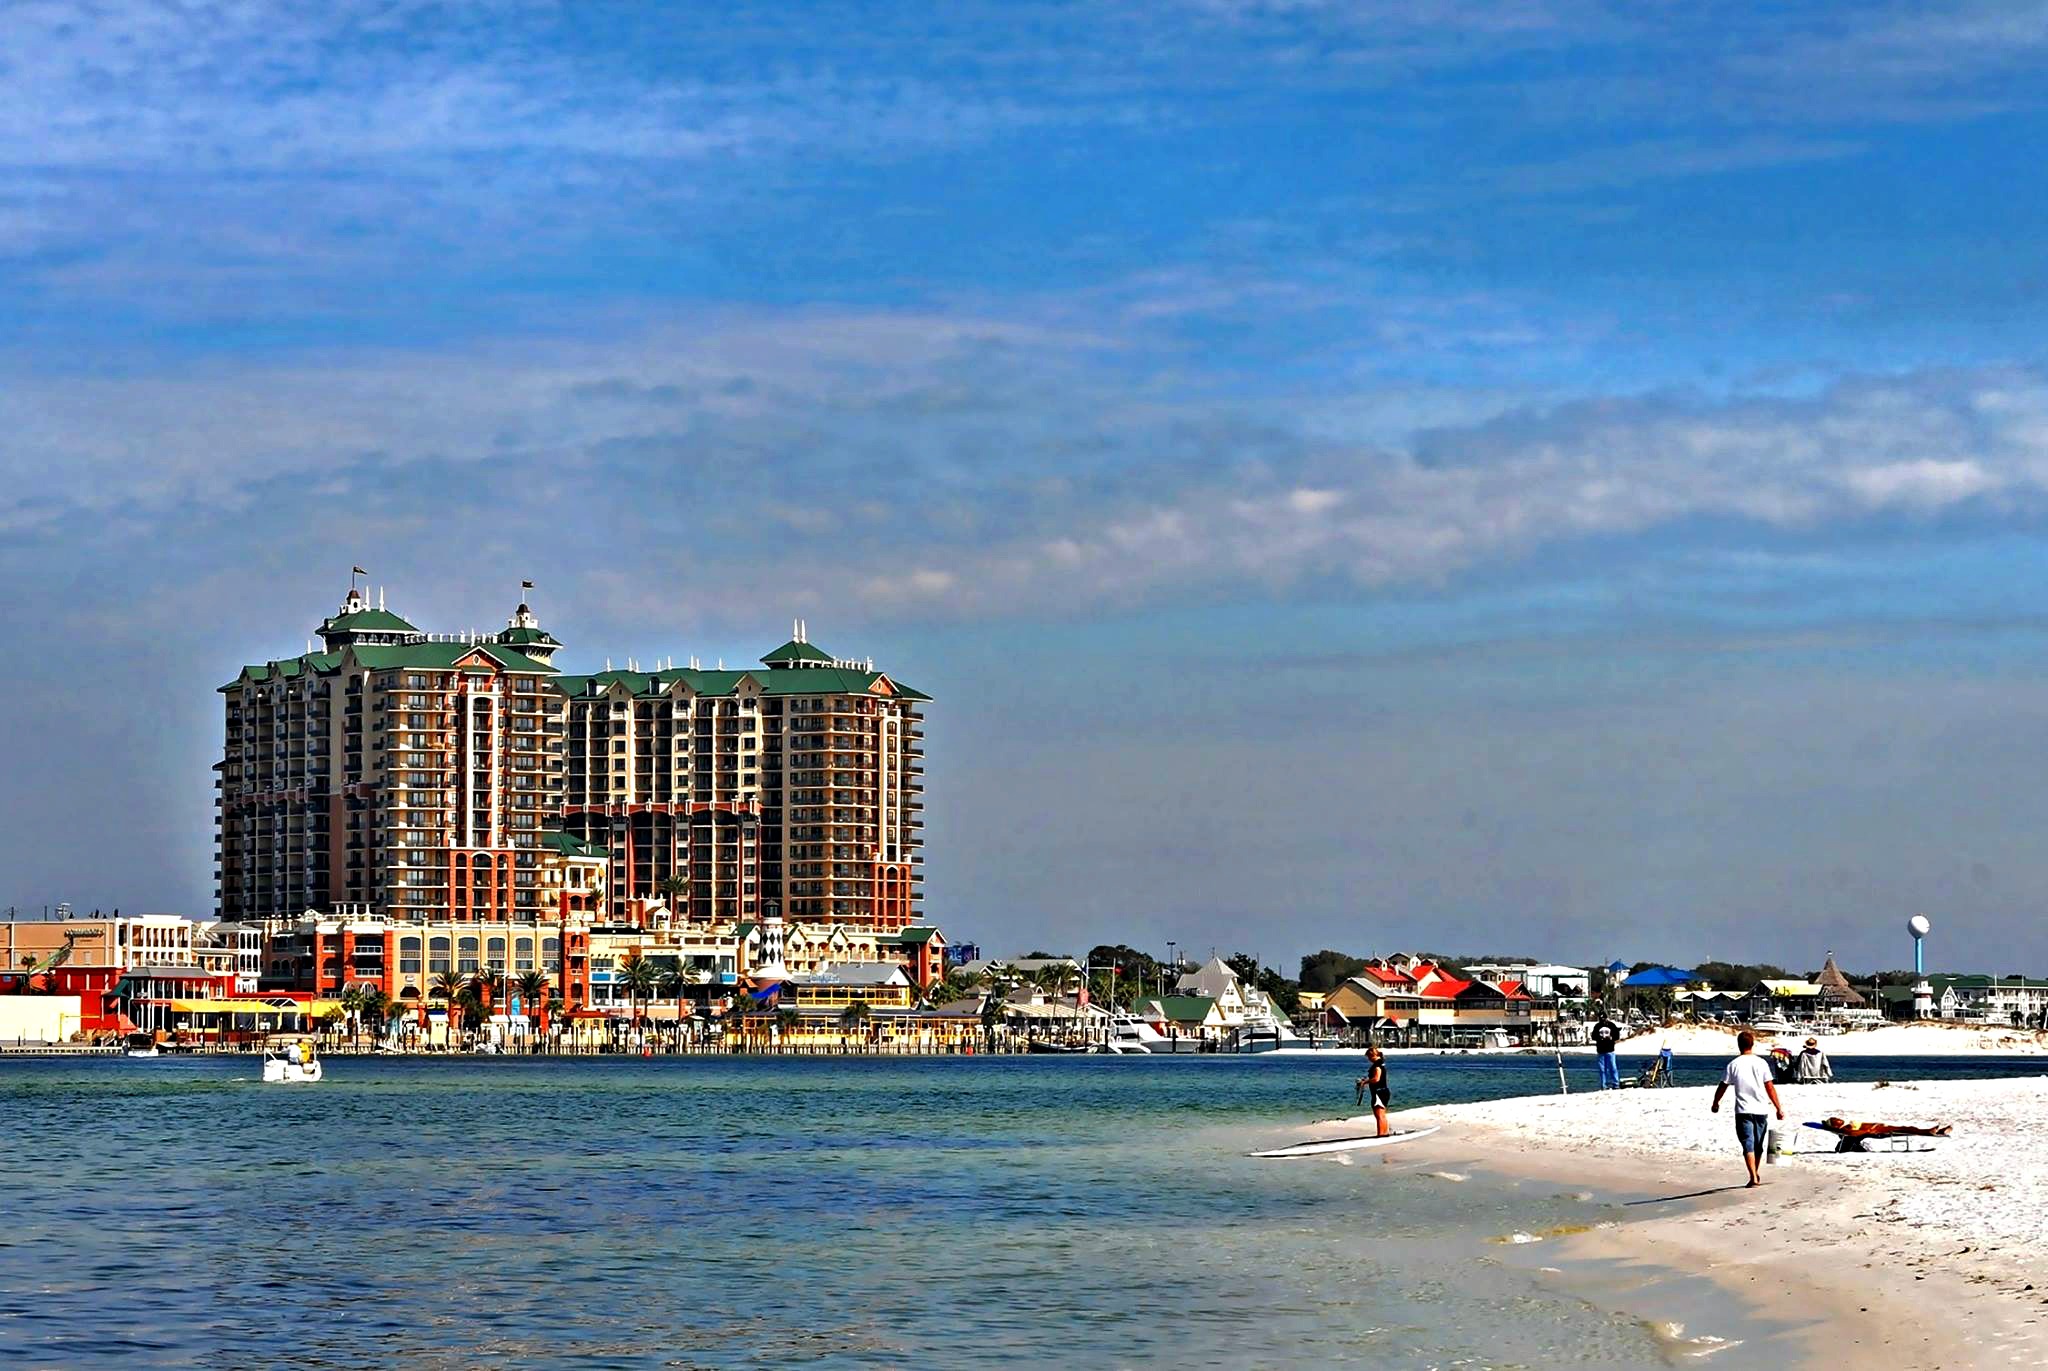 View of the Emerald Grande at HarborWalk Village from its private beach